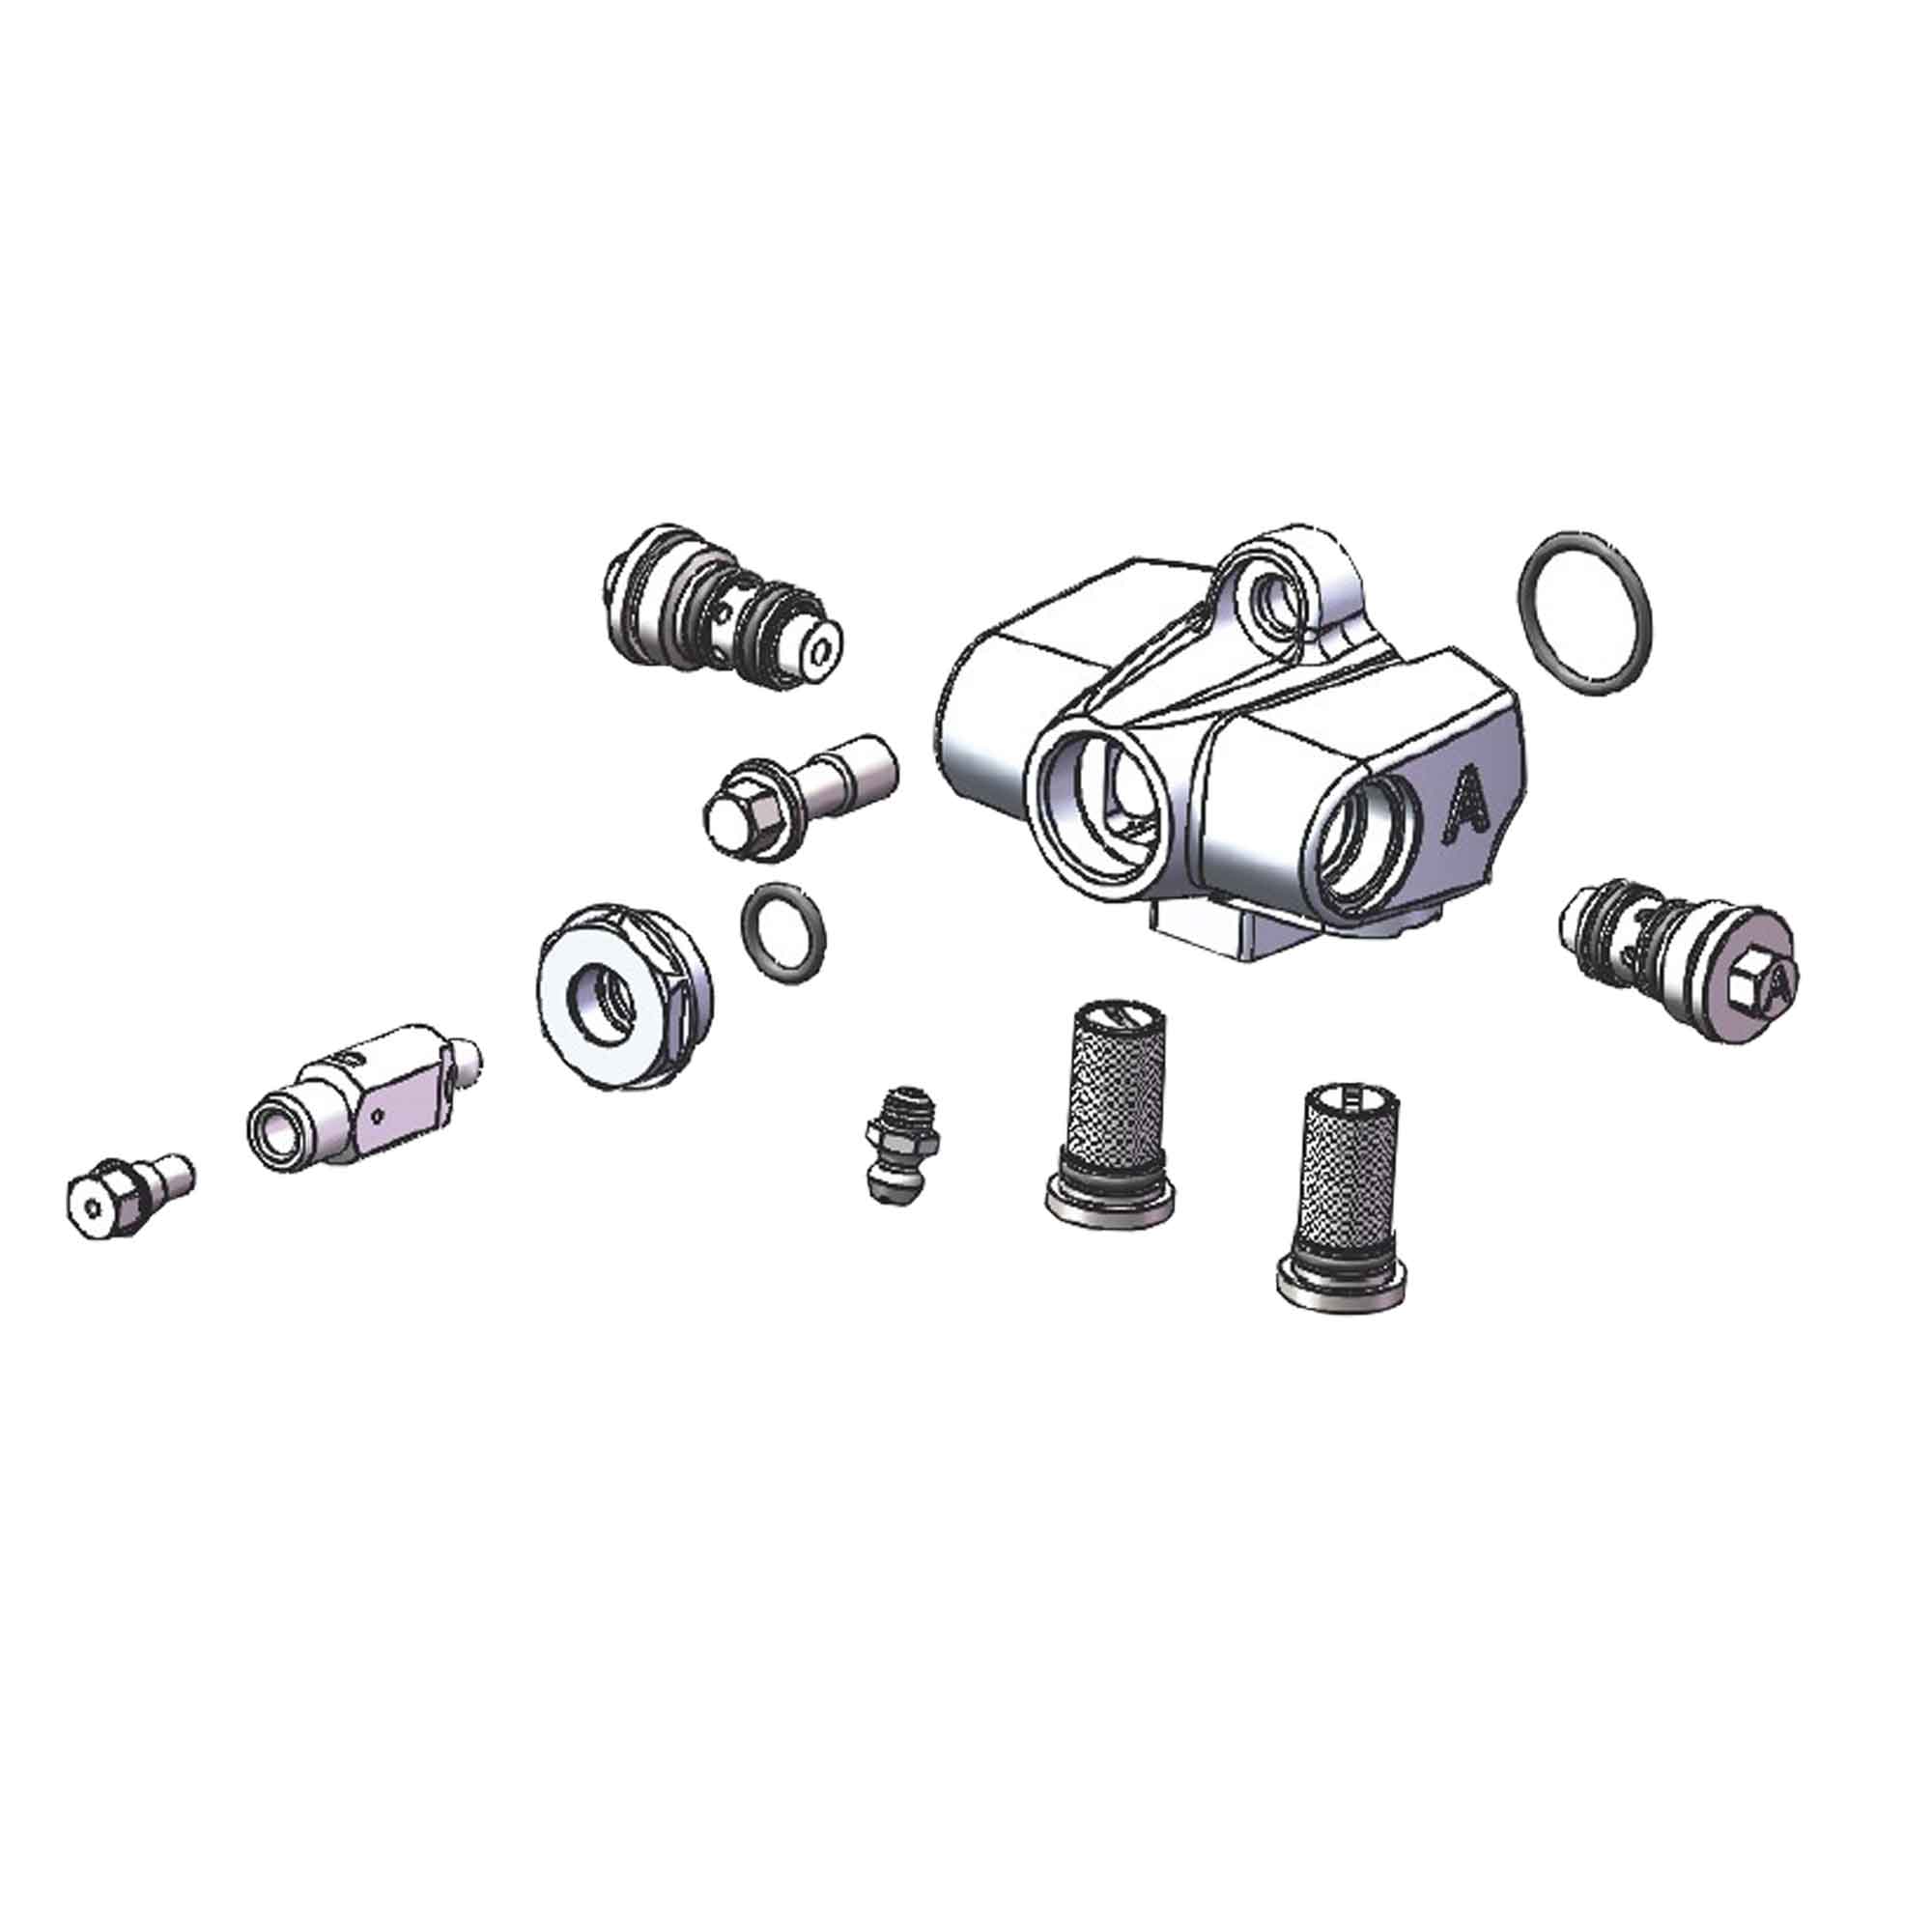 336426 - Front End Assembly Kit - PURspray